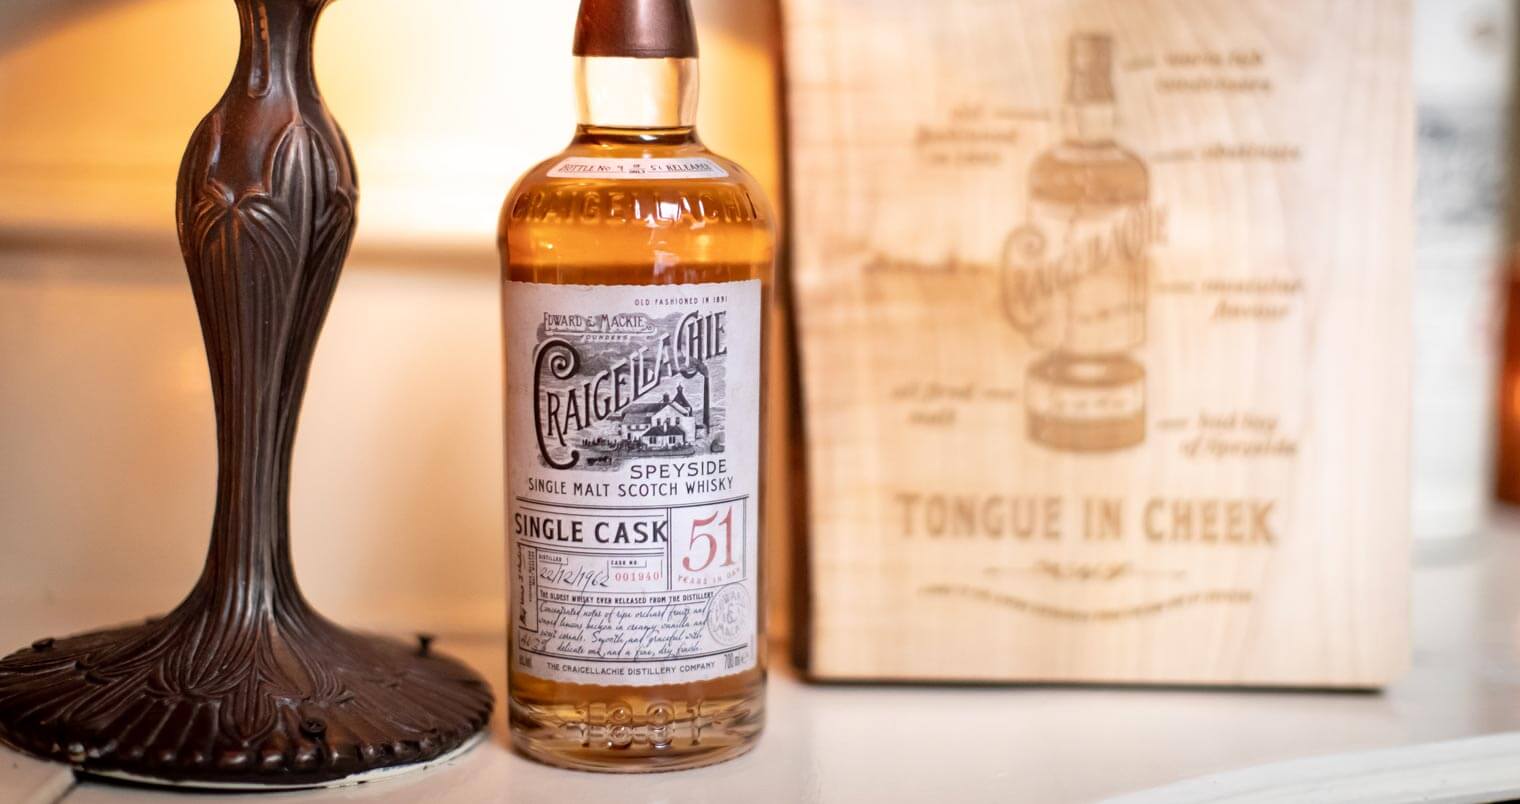 Craigellachie Whisky 51 Year, bottle and package, featured image